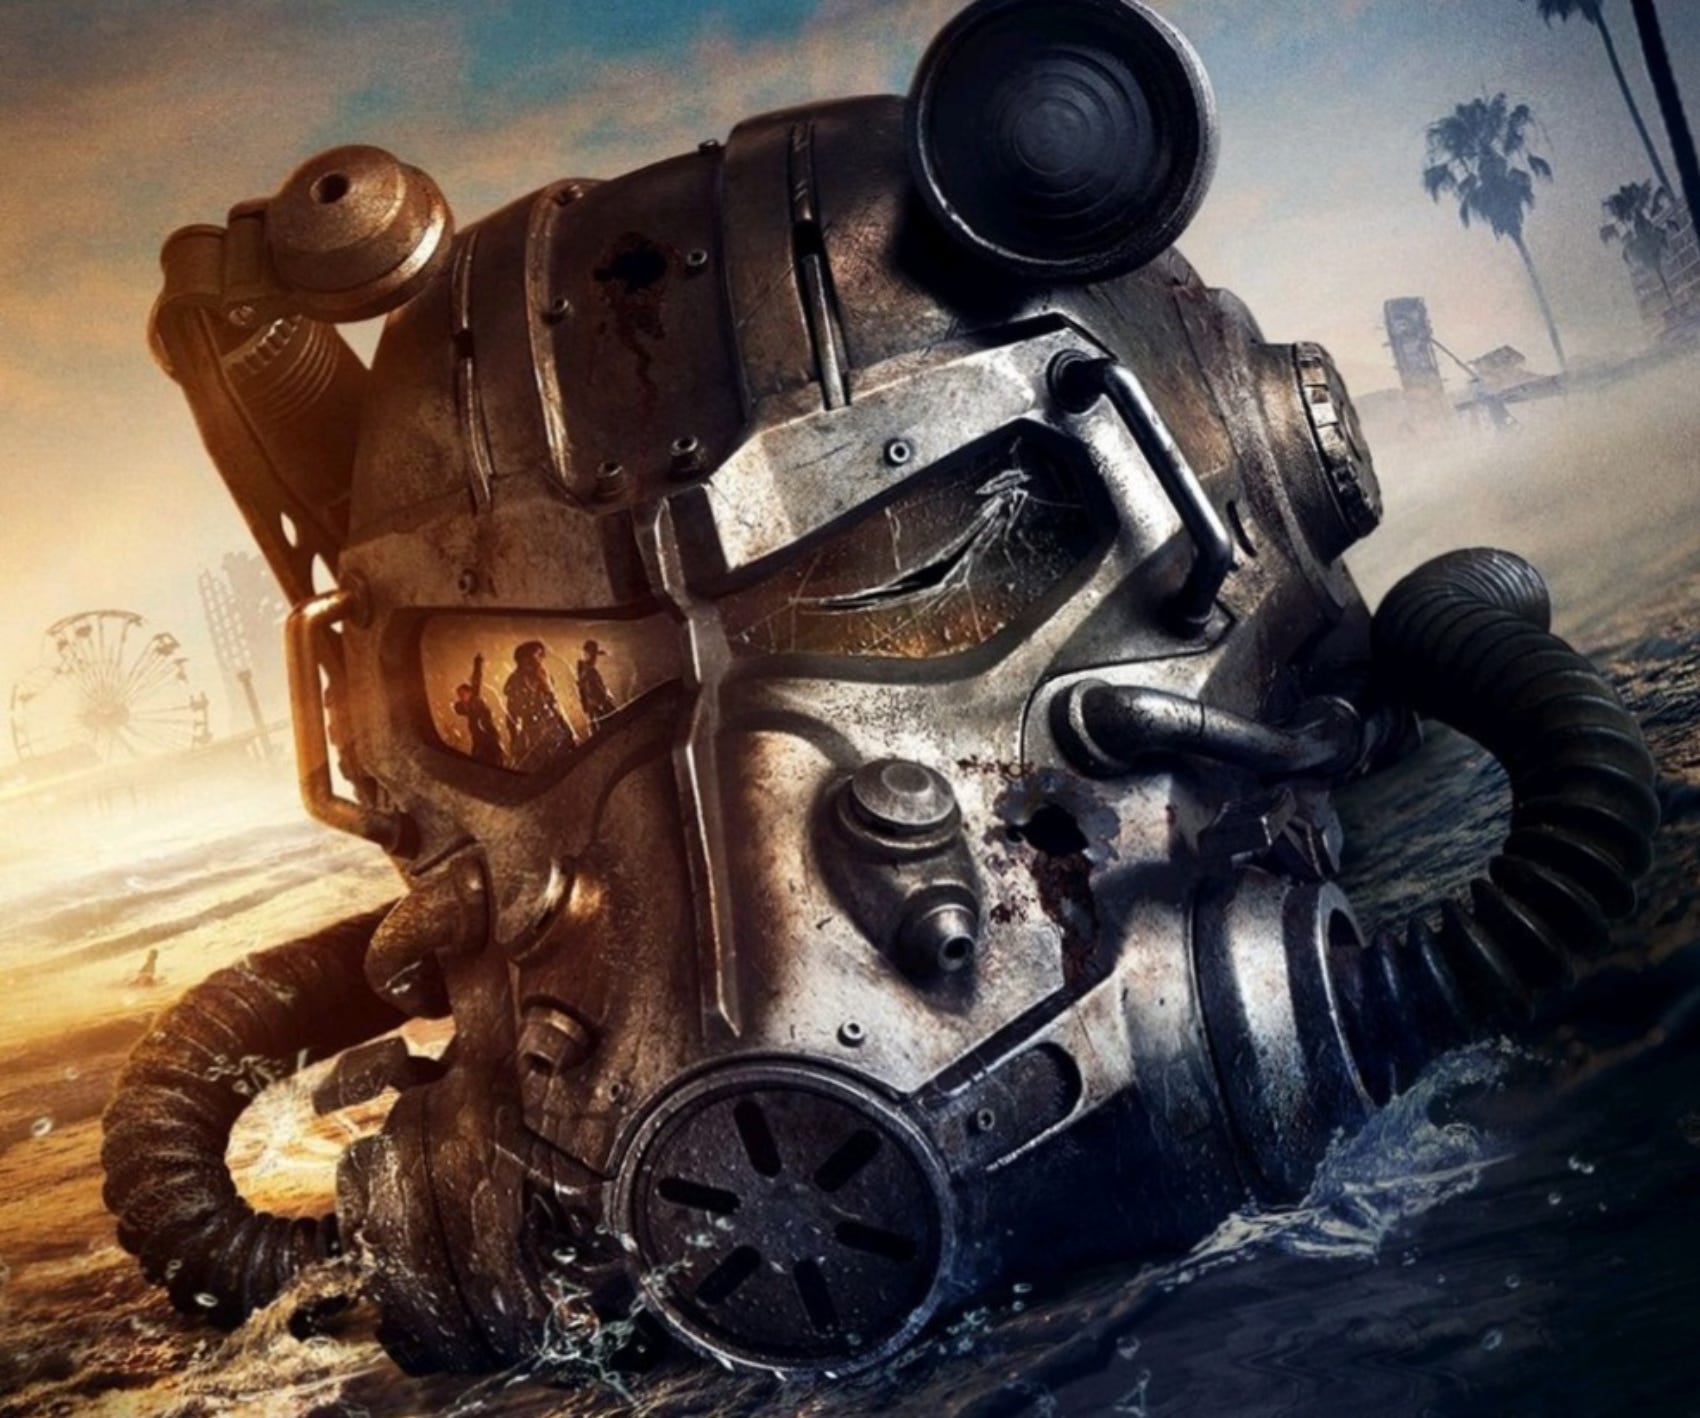 Todd Howard steps in to double down that yes, Fallout: New Vegas is canon to Amazon's Fallout